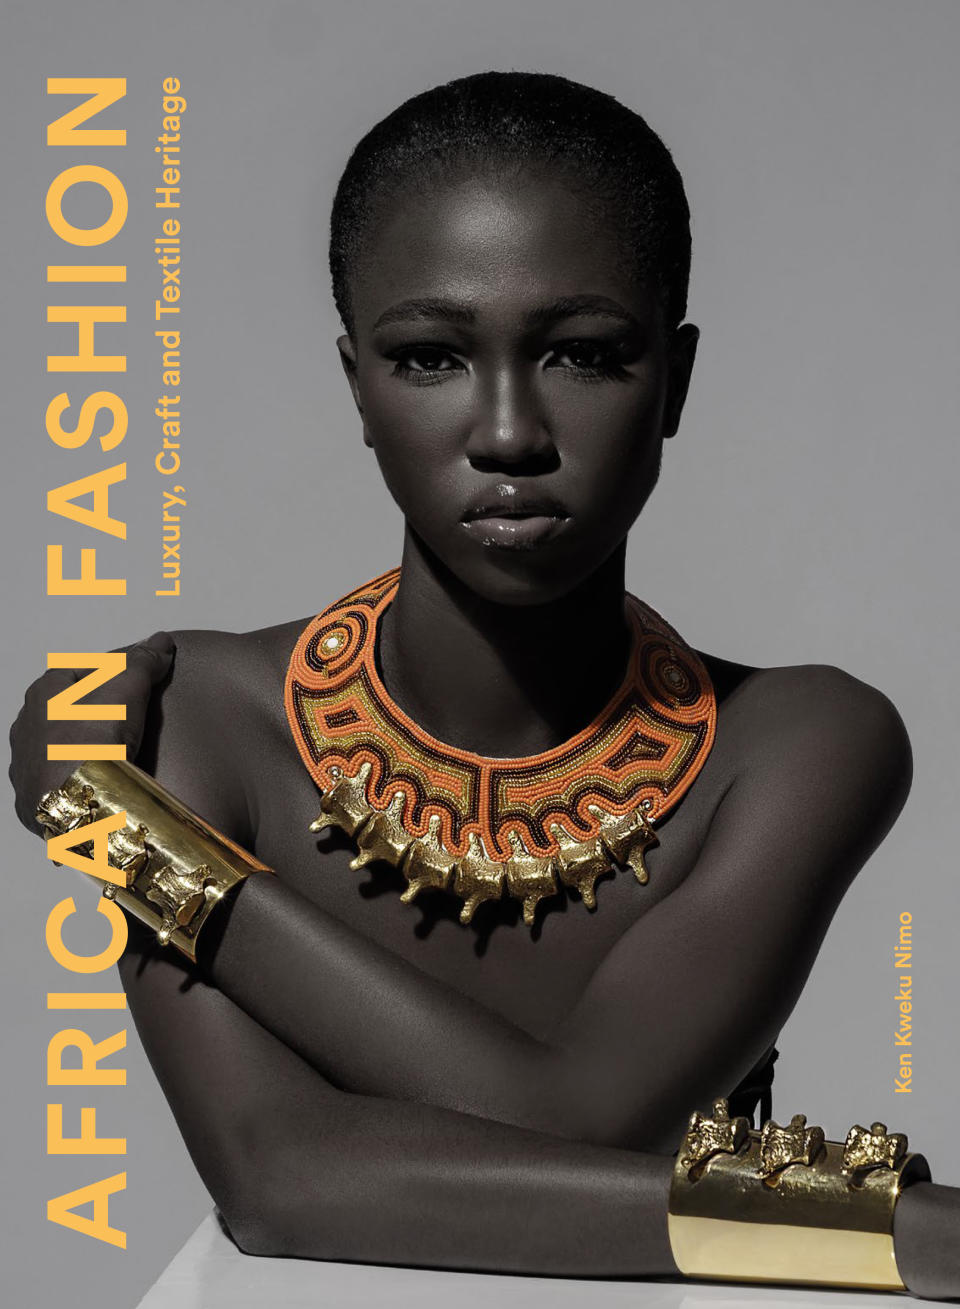 This photo shows the cover of “Africa in Fashion” by Ken Kweku Nimo. (Laurence King Publishing via AP)